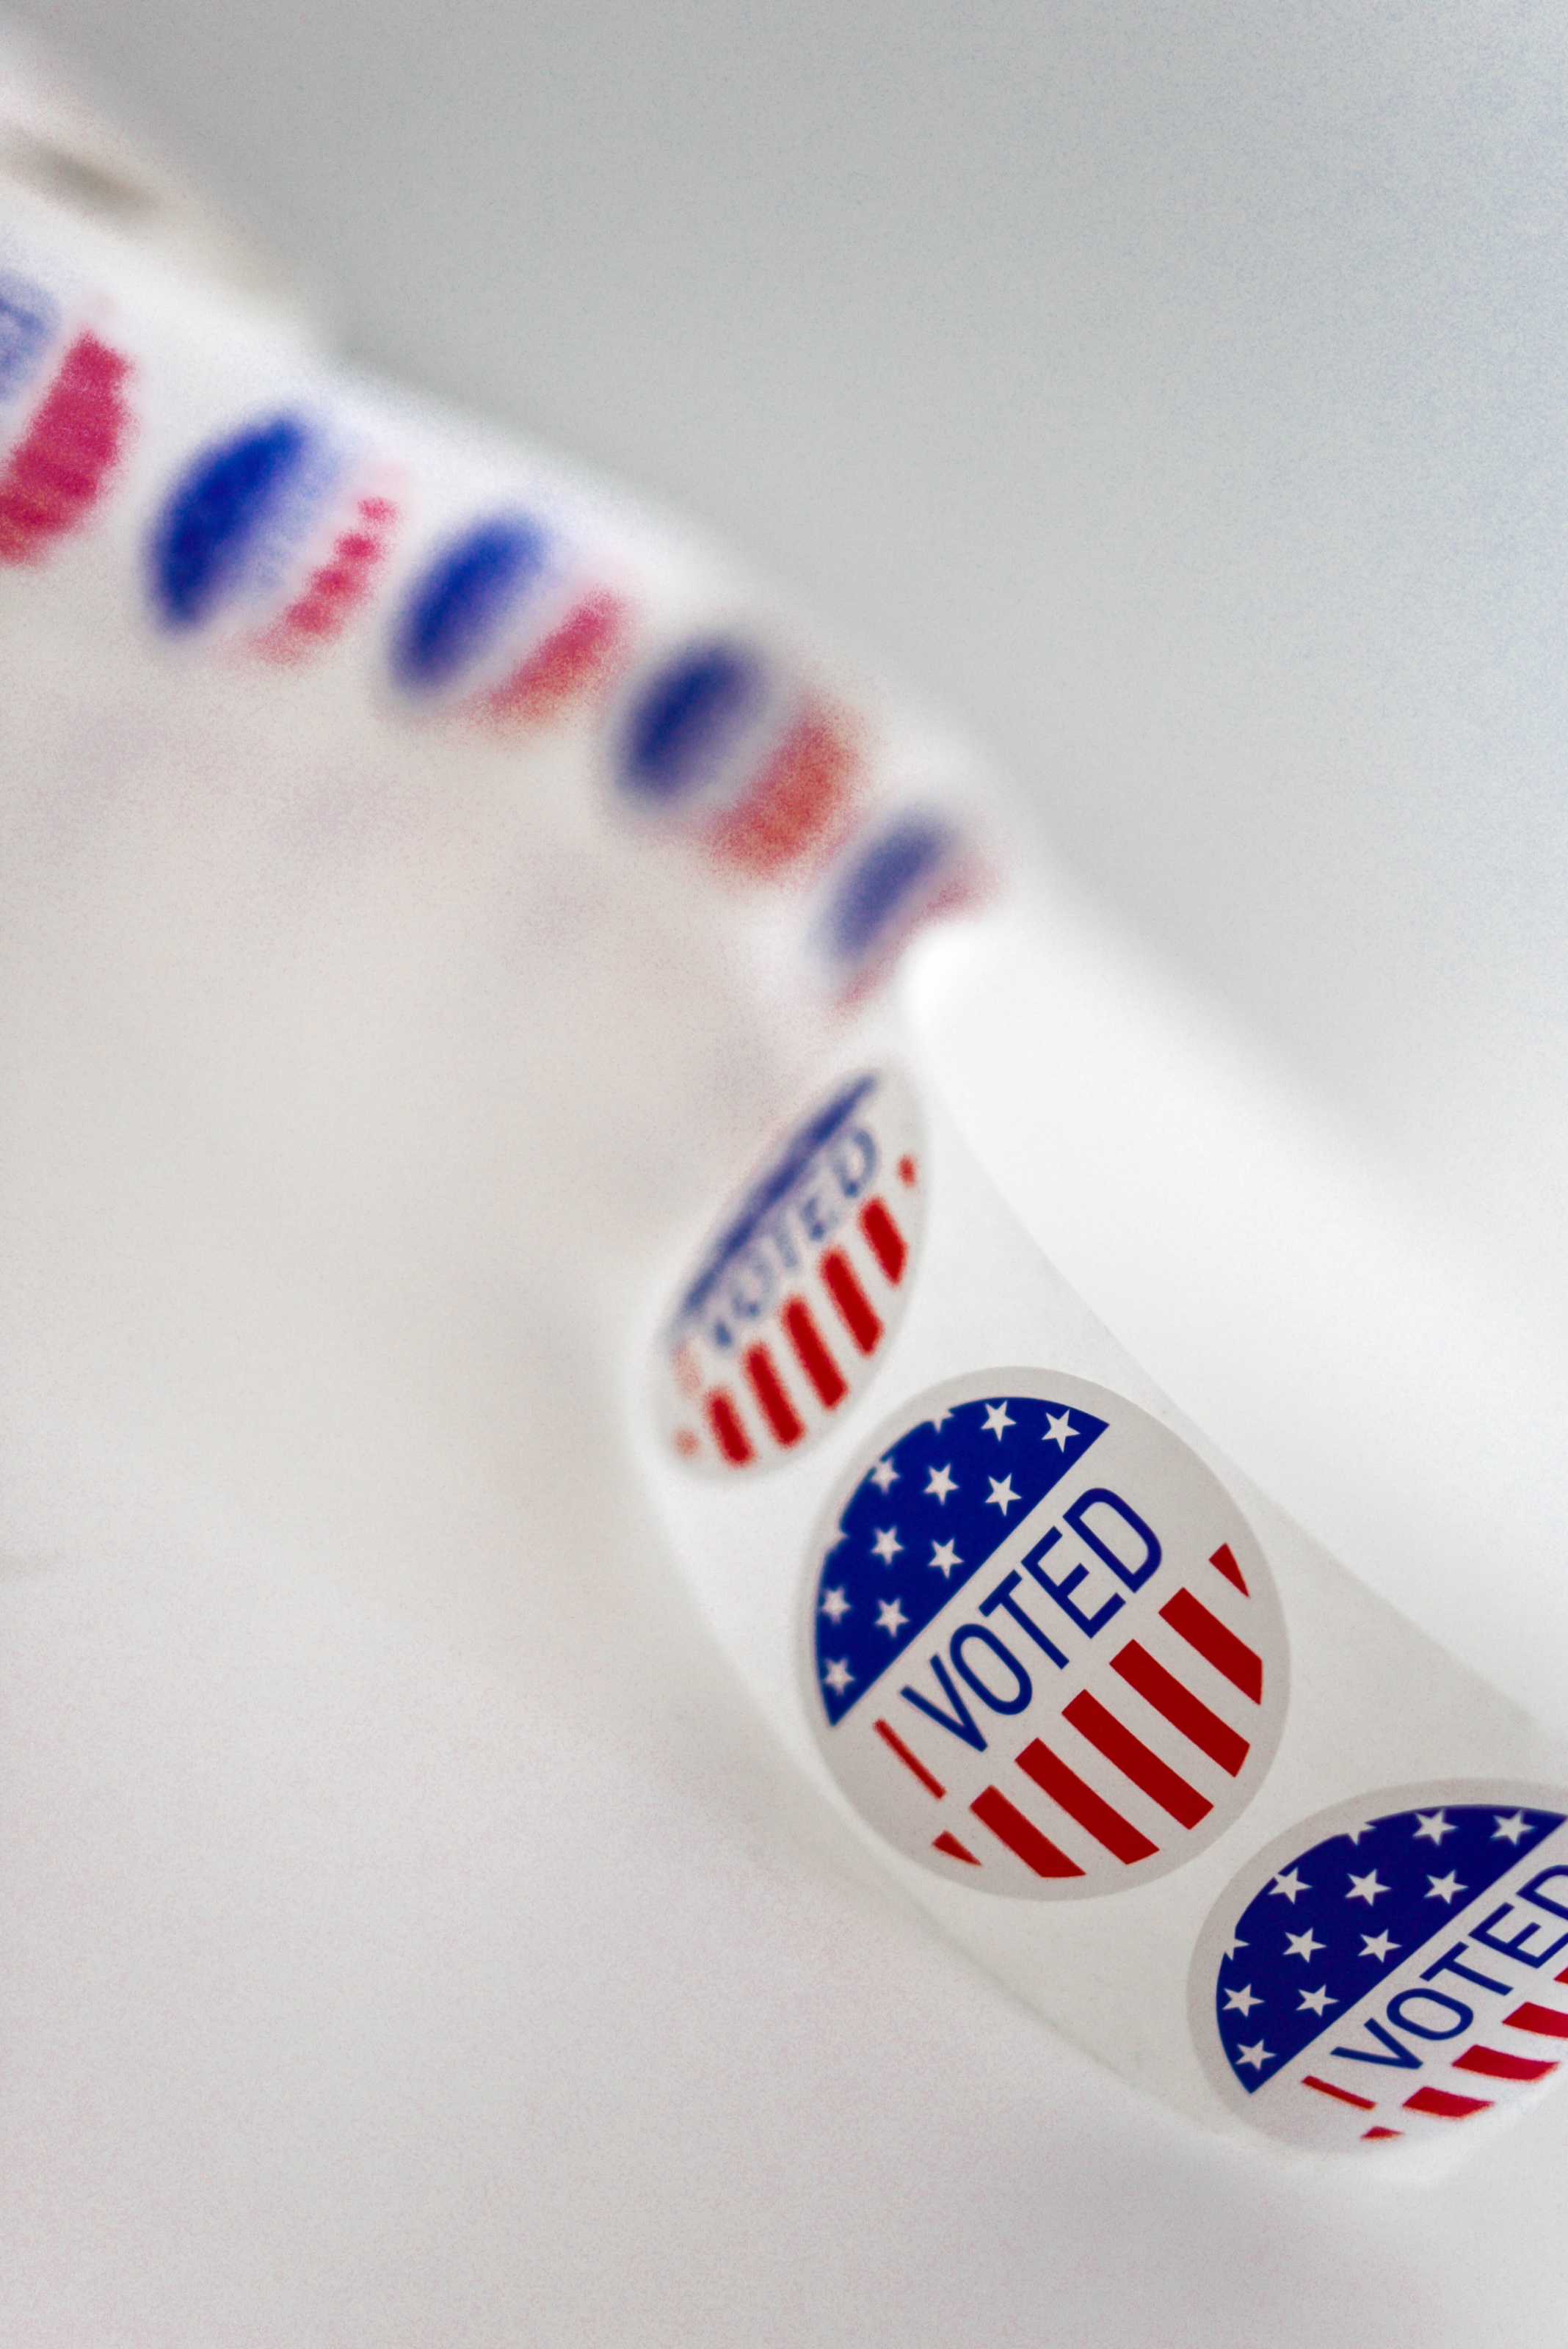 how to increase voter participation - voted stickers